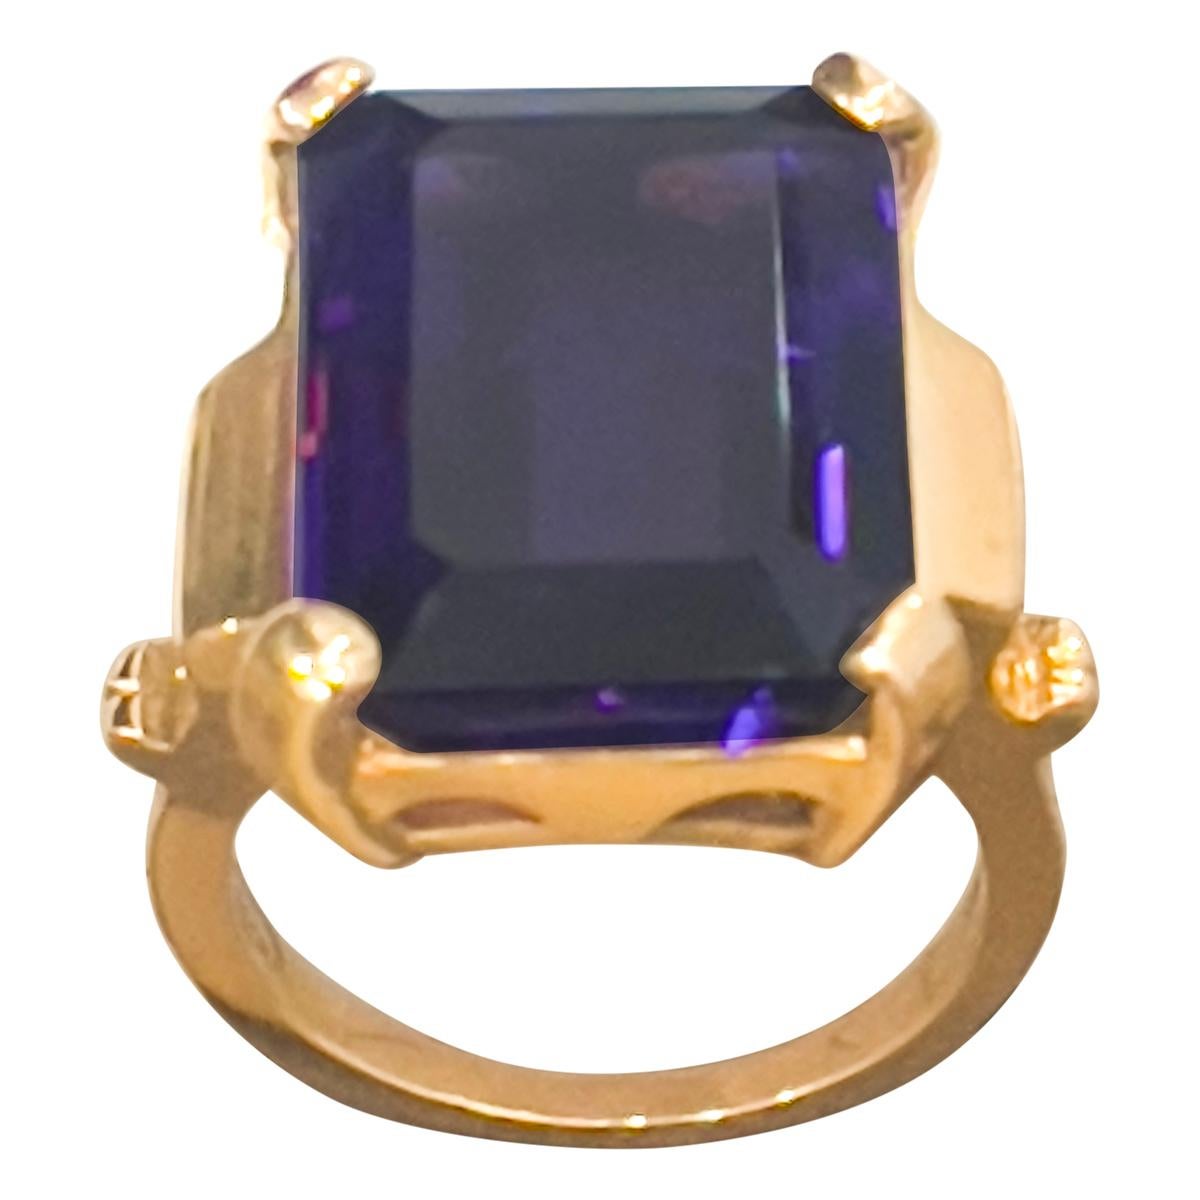 Approximately 15 Carat Emerald Cut Amethyst  Cocktail Ring in 14 Karat Yellow Gold Size 6.5
18 x 14 MM Amethyst  Cocktail Ring in 14 Karat Yellow Gold 

This is a Beautiful Cocktail ring ring which has a large approximately 15 carat of  Amethyst .